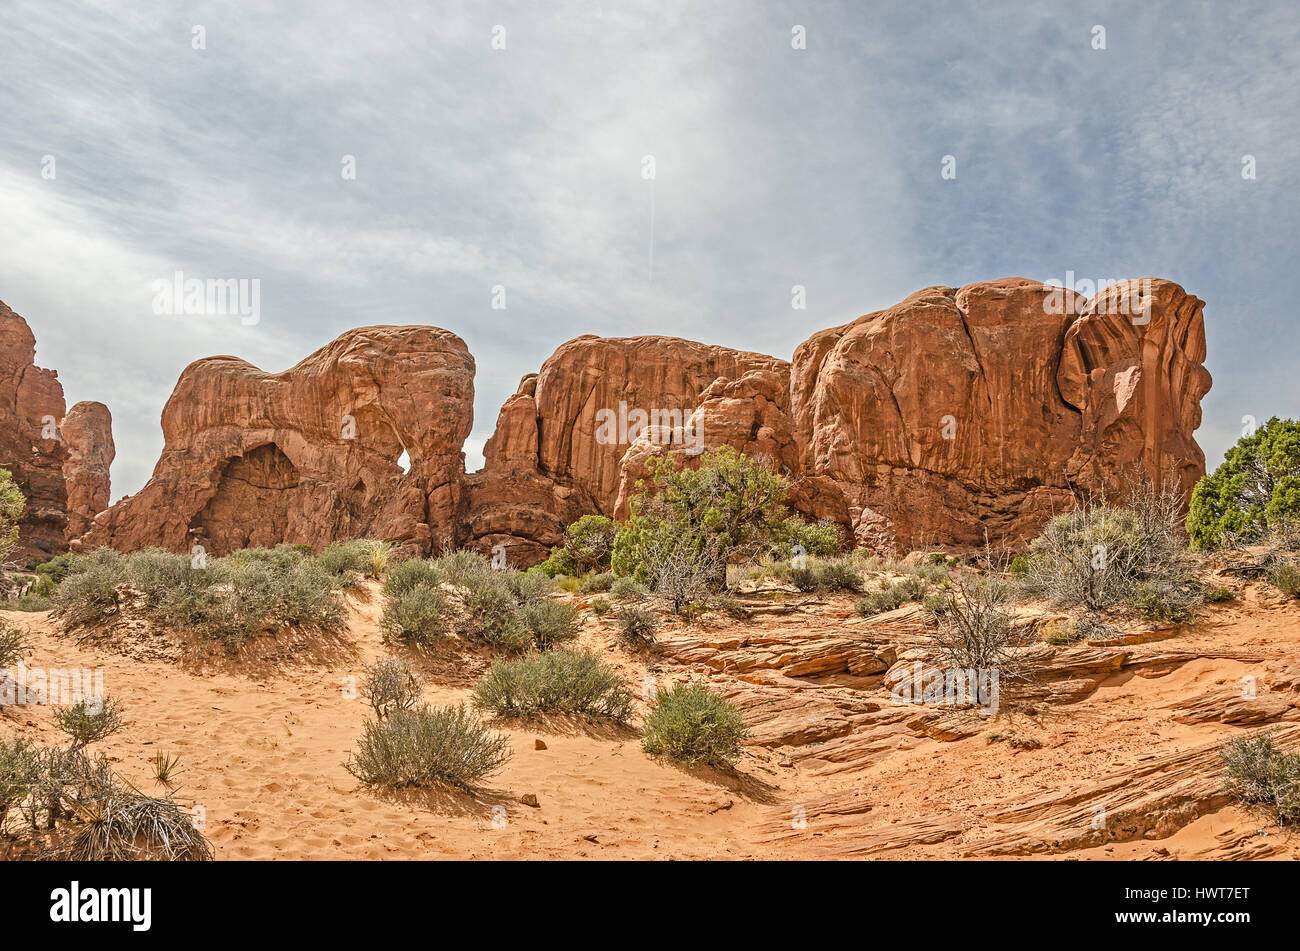 These sandstone formations in the windows section of Arches National Park resemble a Parade of Elephants. Stock Photo